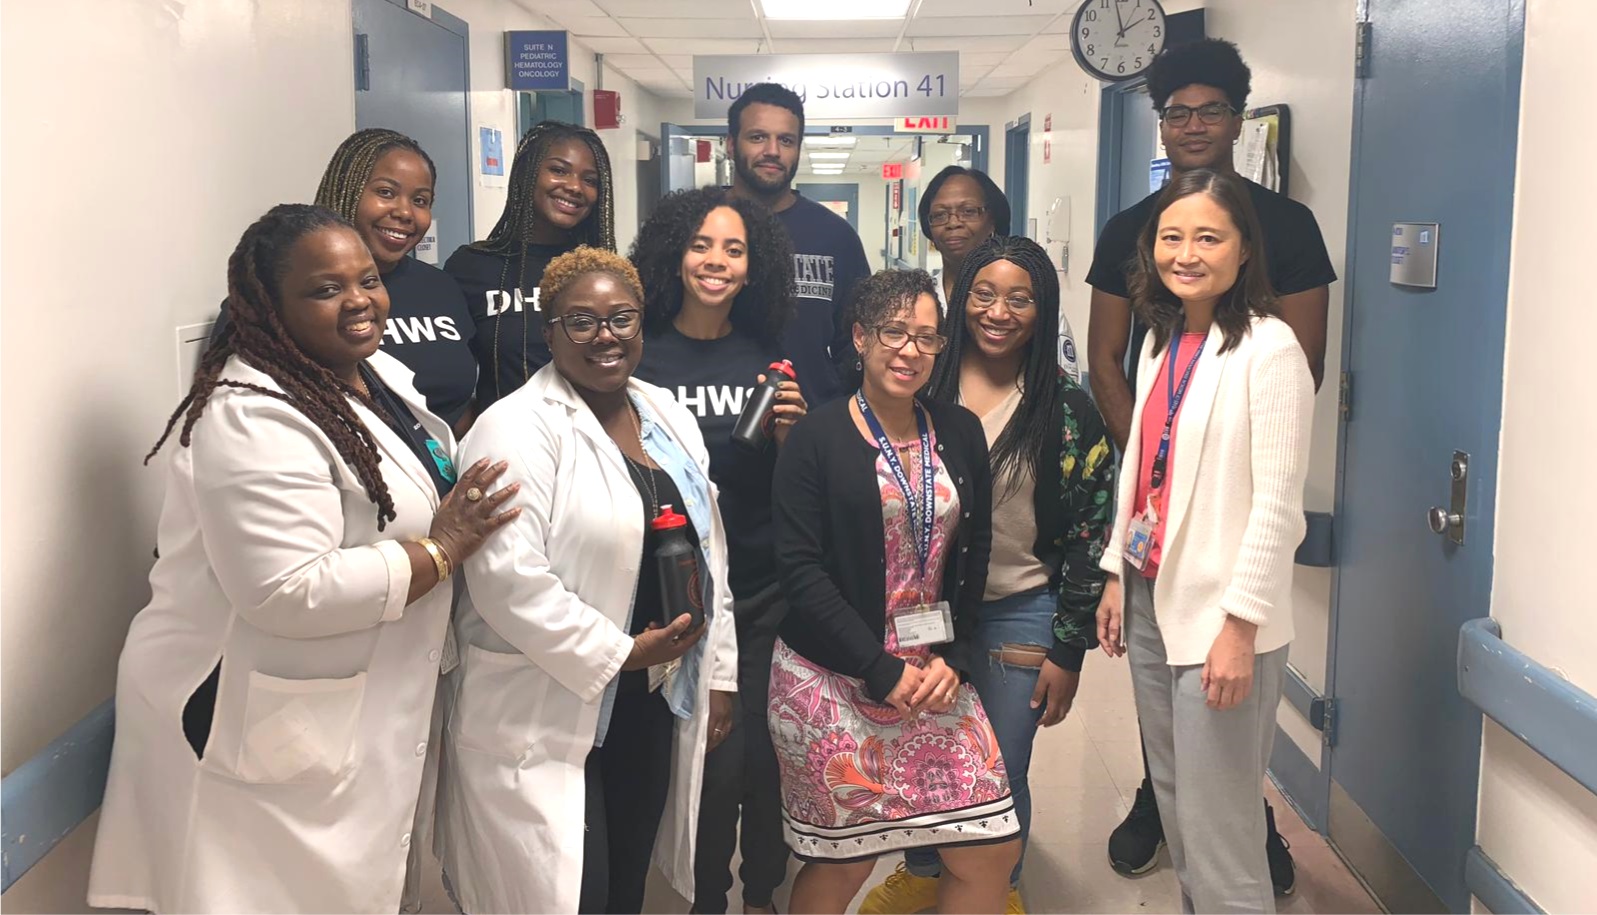 DHWS students pose for photo after sickle cell service project in university hospital